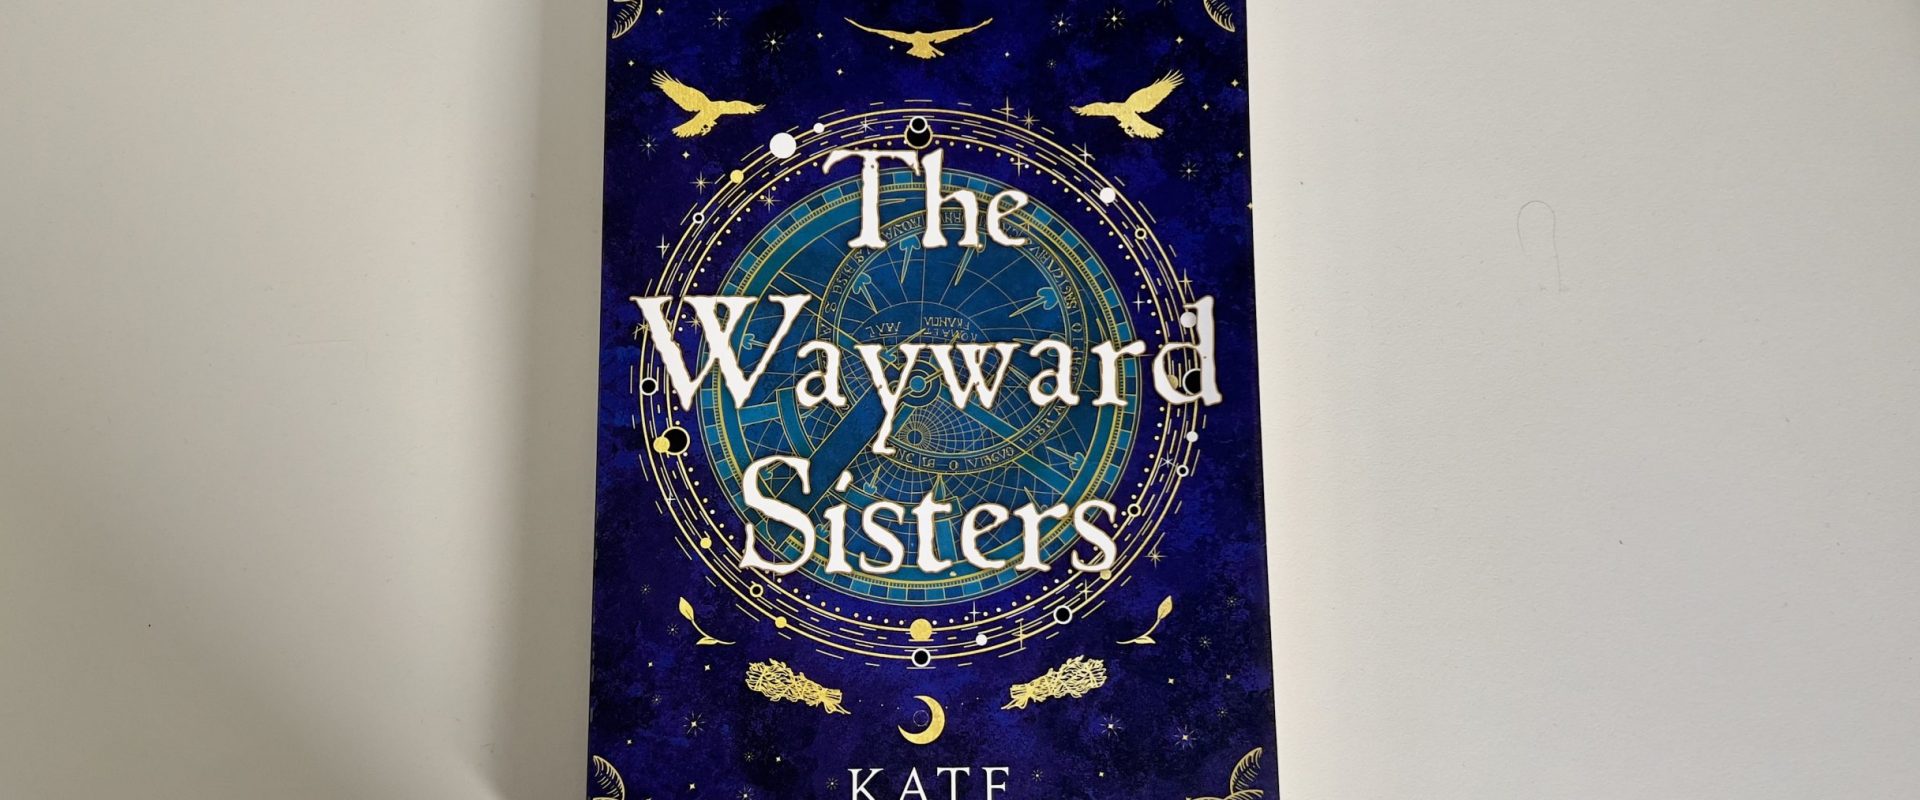 The Wayward Sisters by Kate Hodges – a cosy spooky read